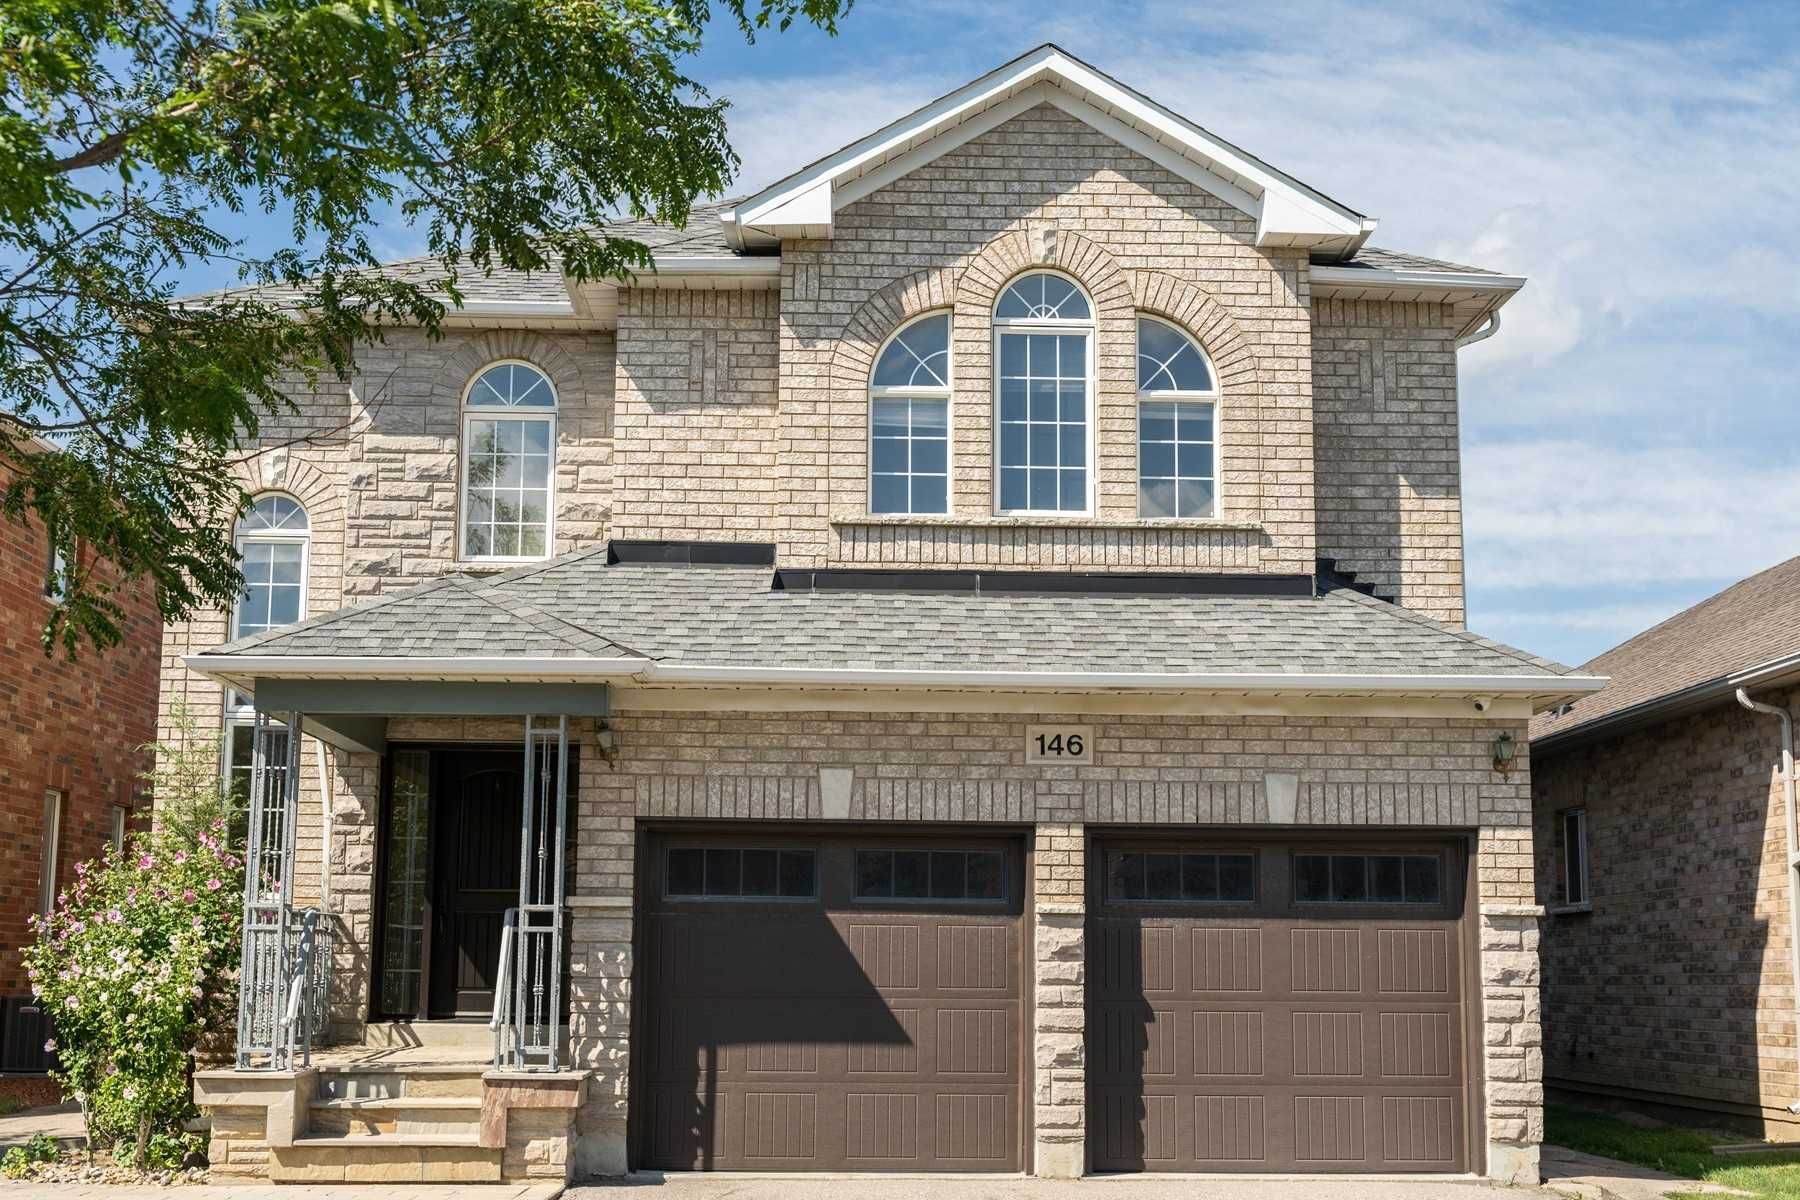 Main Photo: 146 Sonoma Boulevard in Vaughan: Sonoma Heights House (2-Storey) for sale : MLS®# N4884427